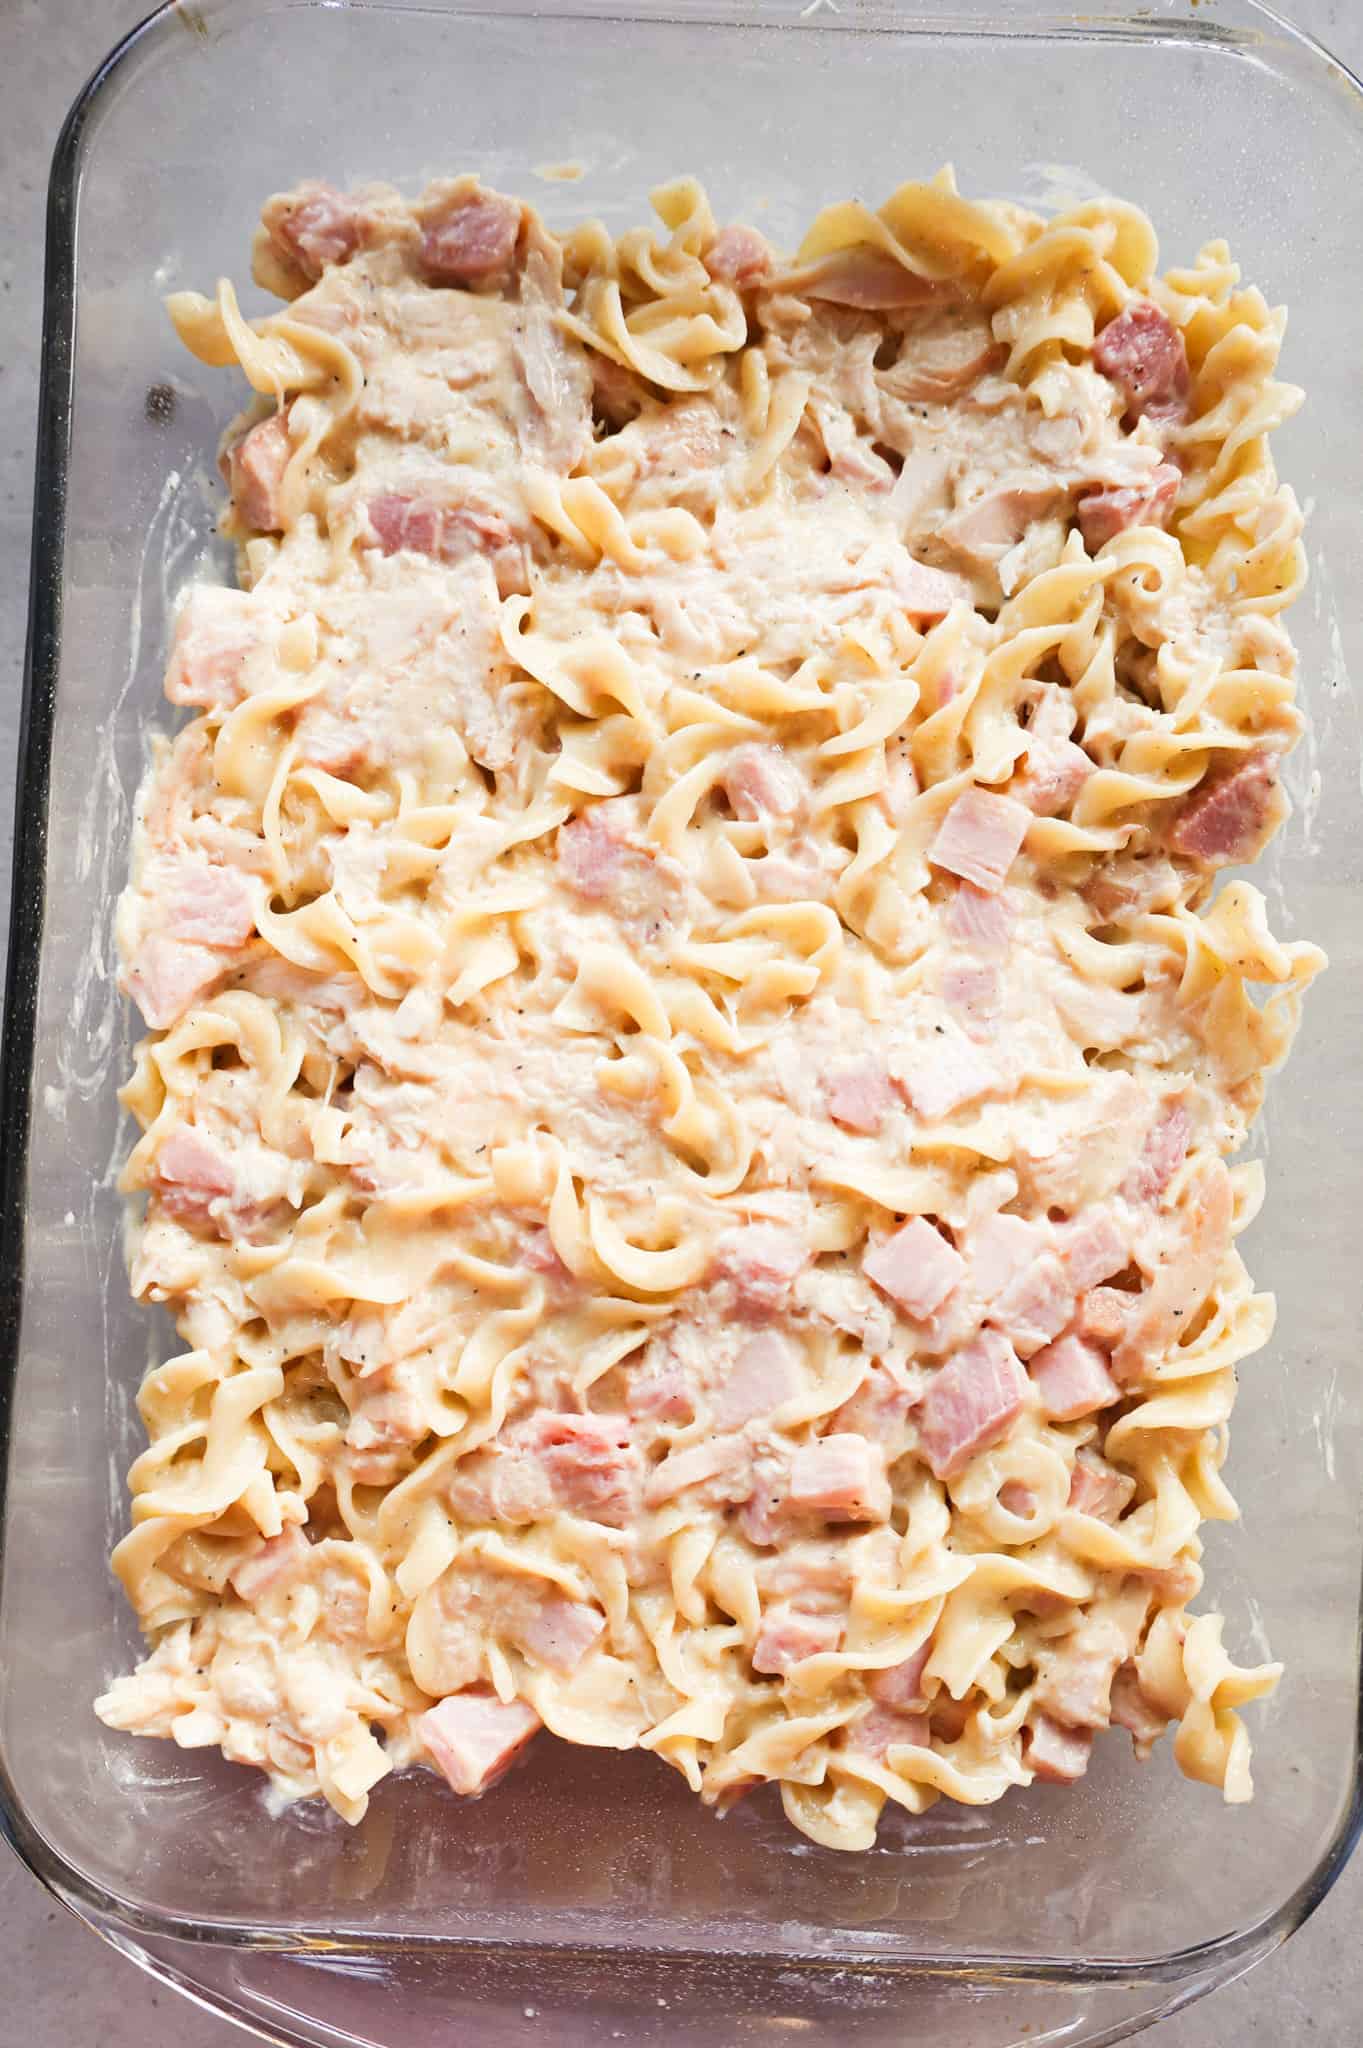 chicken, ham and egg noodle mixture in a baking dish